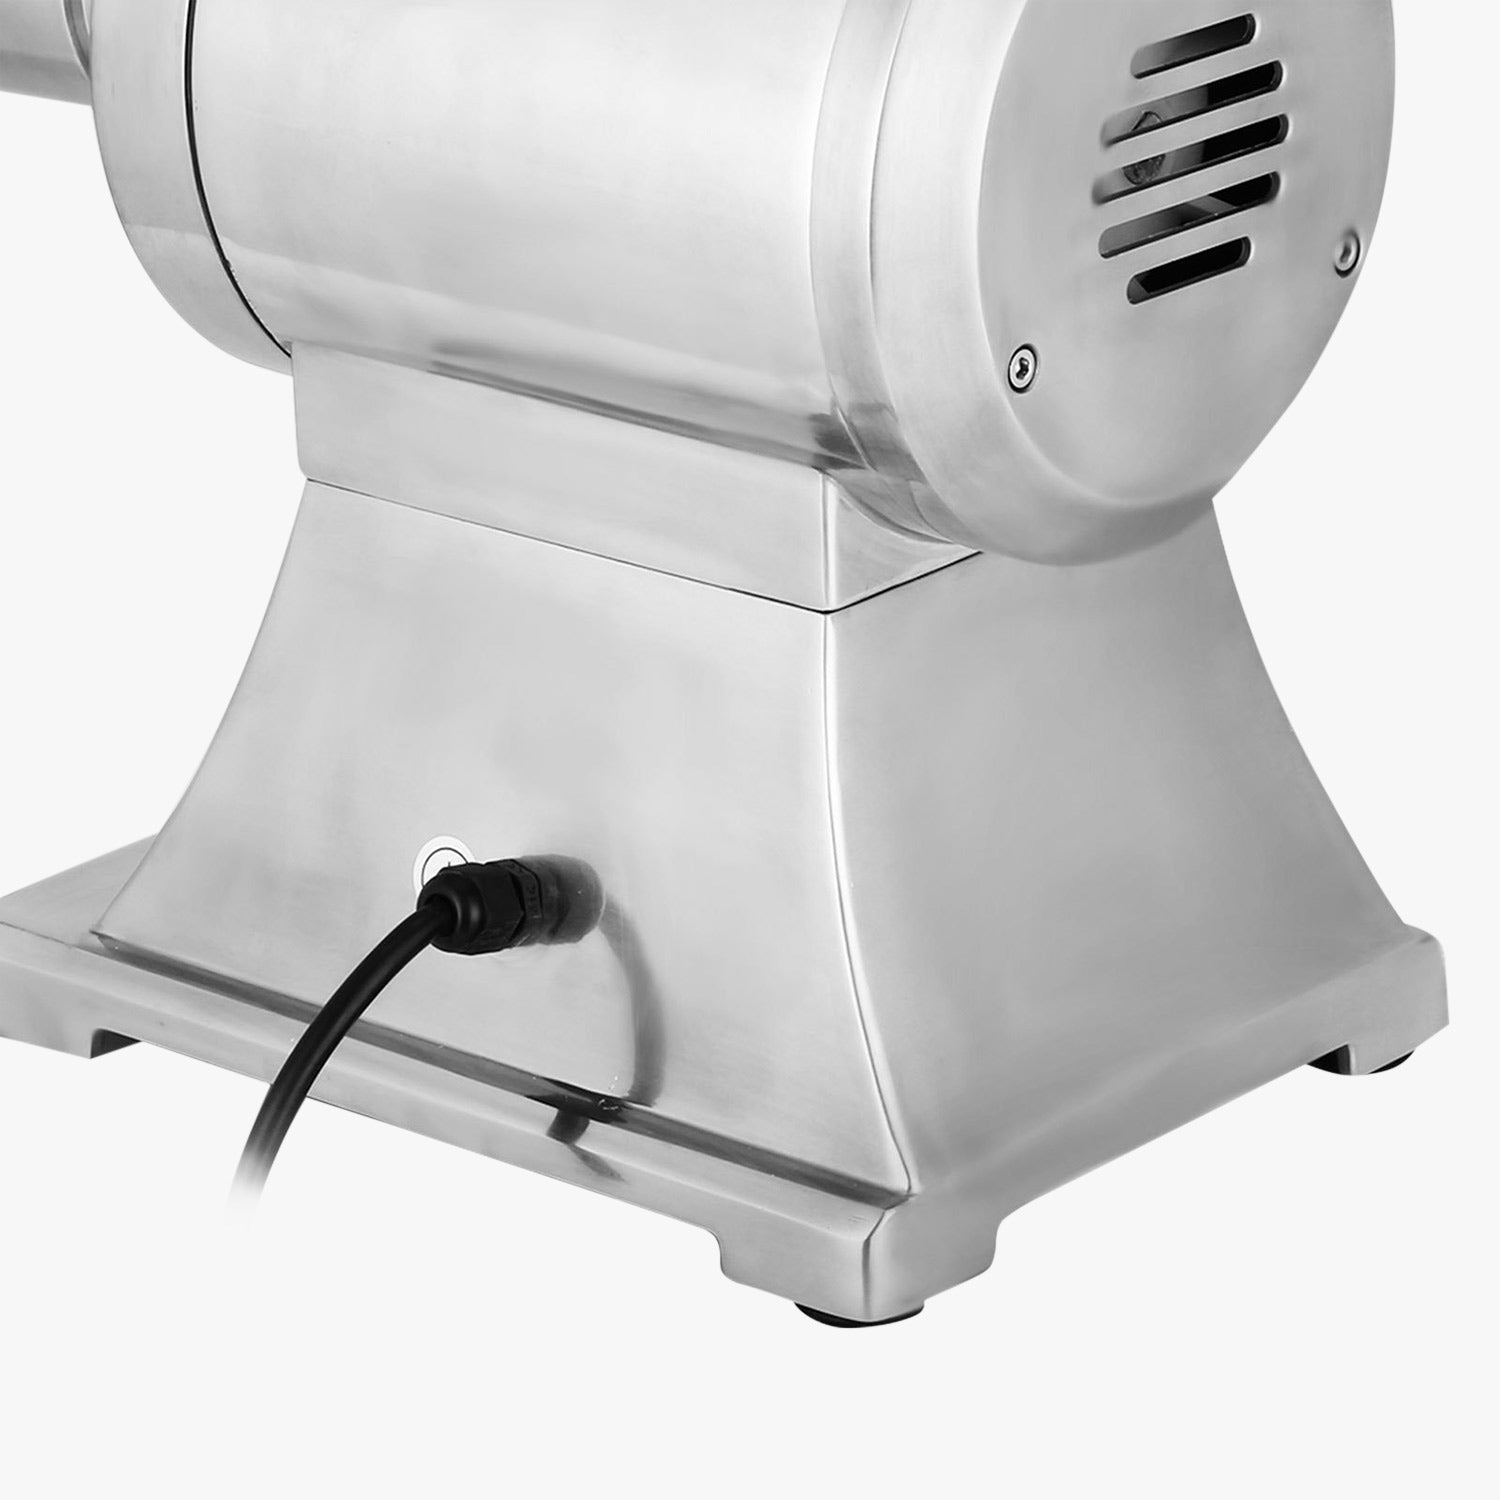 A-PD12 Meat Grinder Commercial | Electric Minced Meat Maker | Stainless Steel Meat Chopper